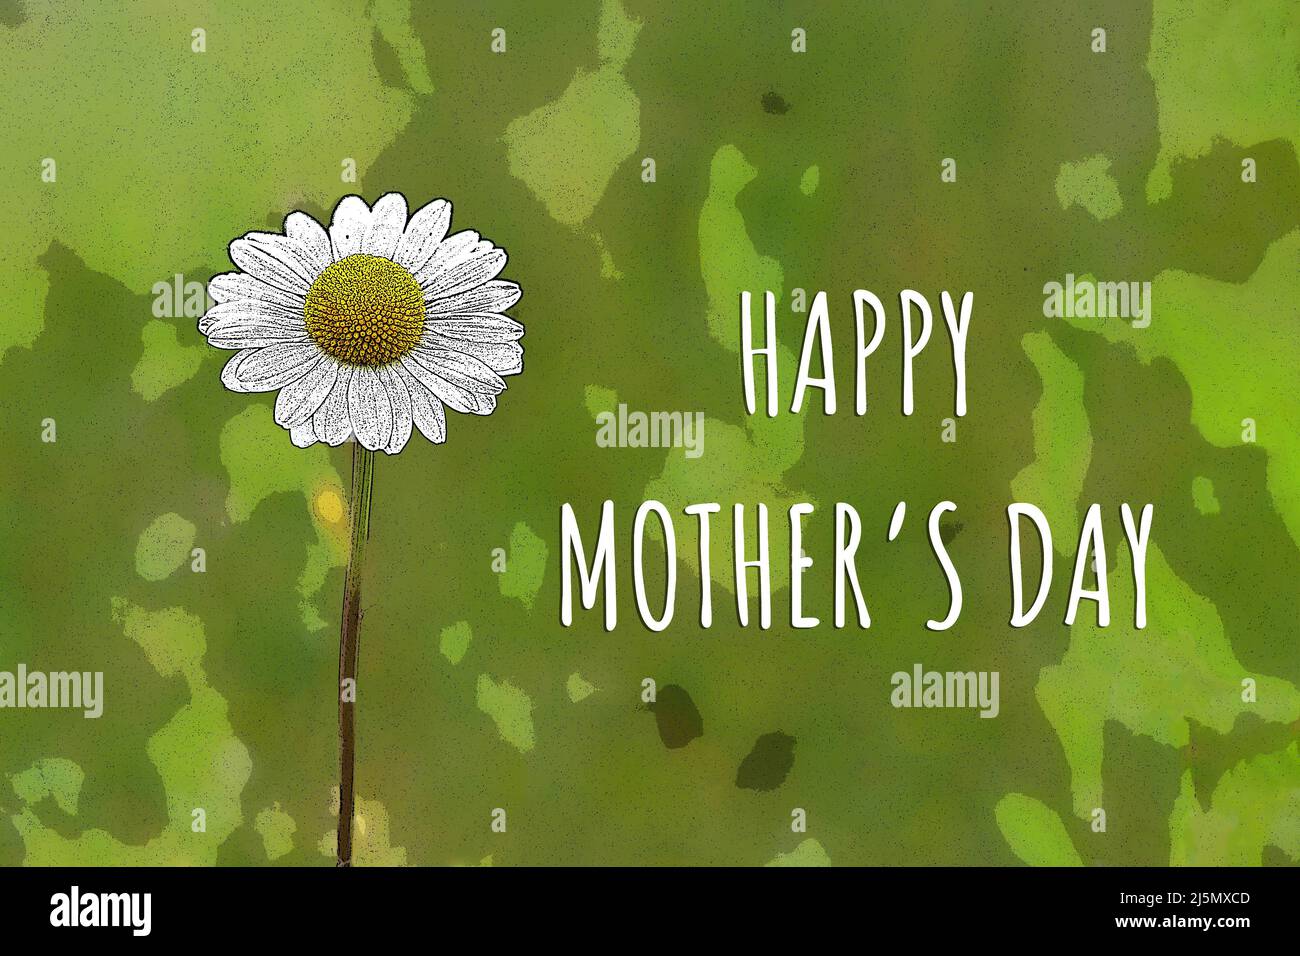 Happy Mothers Day card with a daisy flower illustration Stock Photo